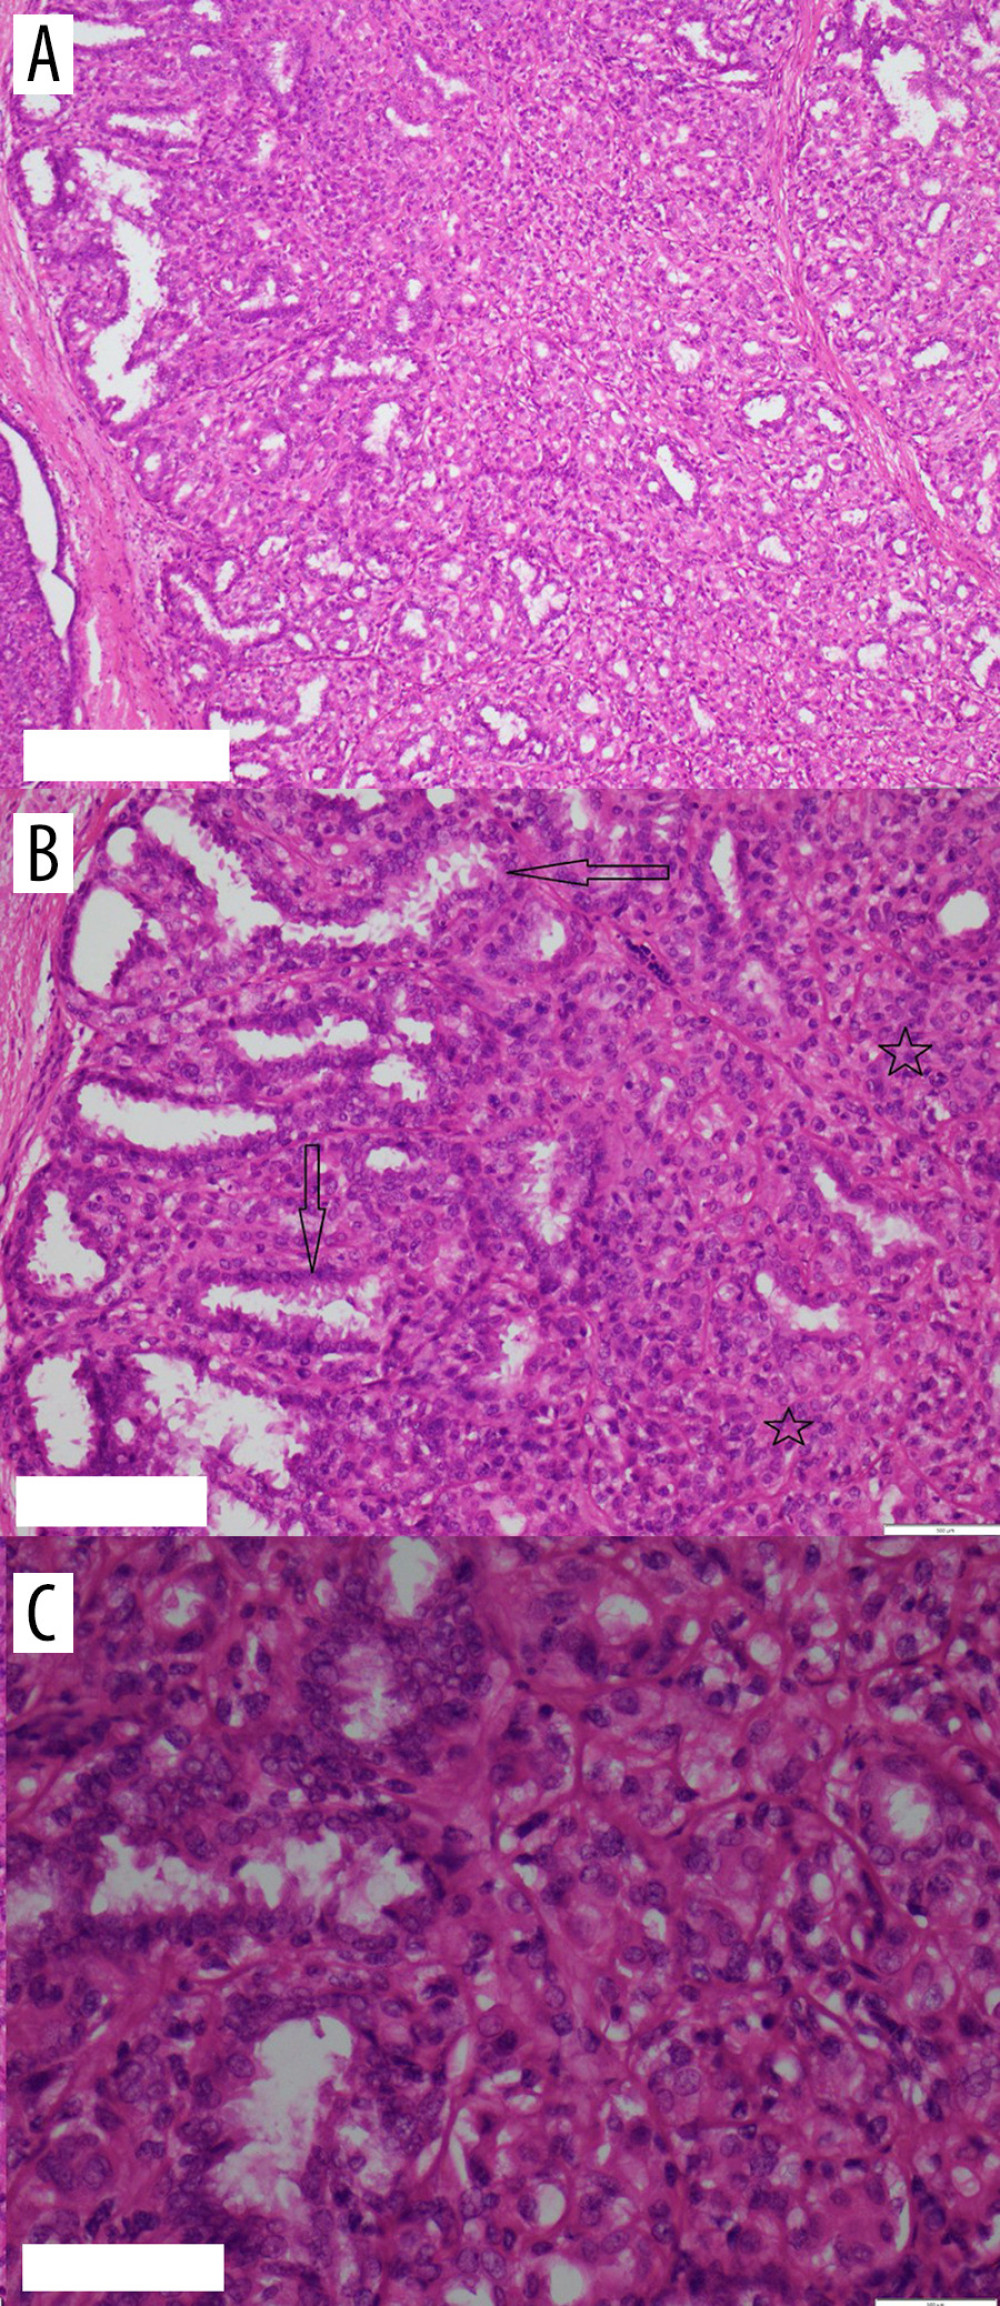 (A) H&E ×10; (B) H&E ×20; (C) H&E ×40, showing a biphasic tumor composed mainly of myoepithelial cells surrounding epithelial-lined spaces.